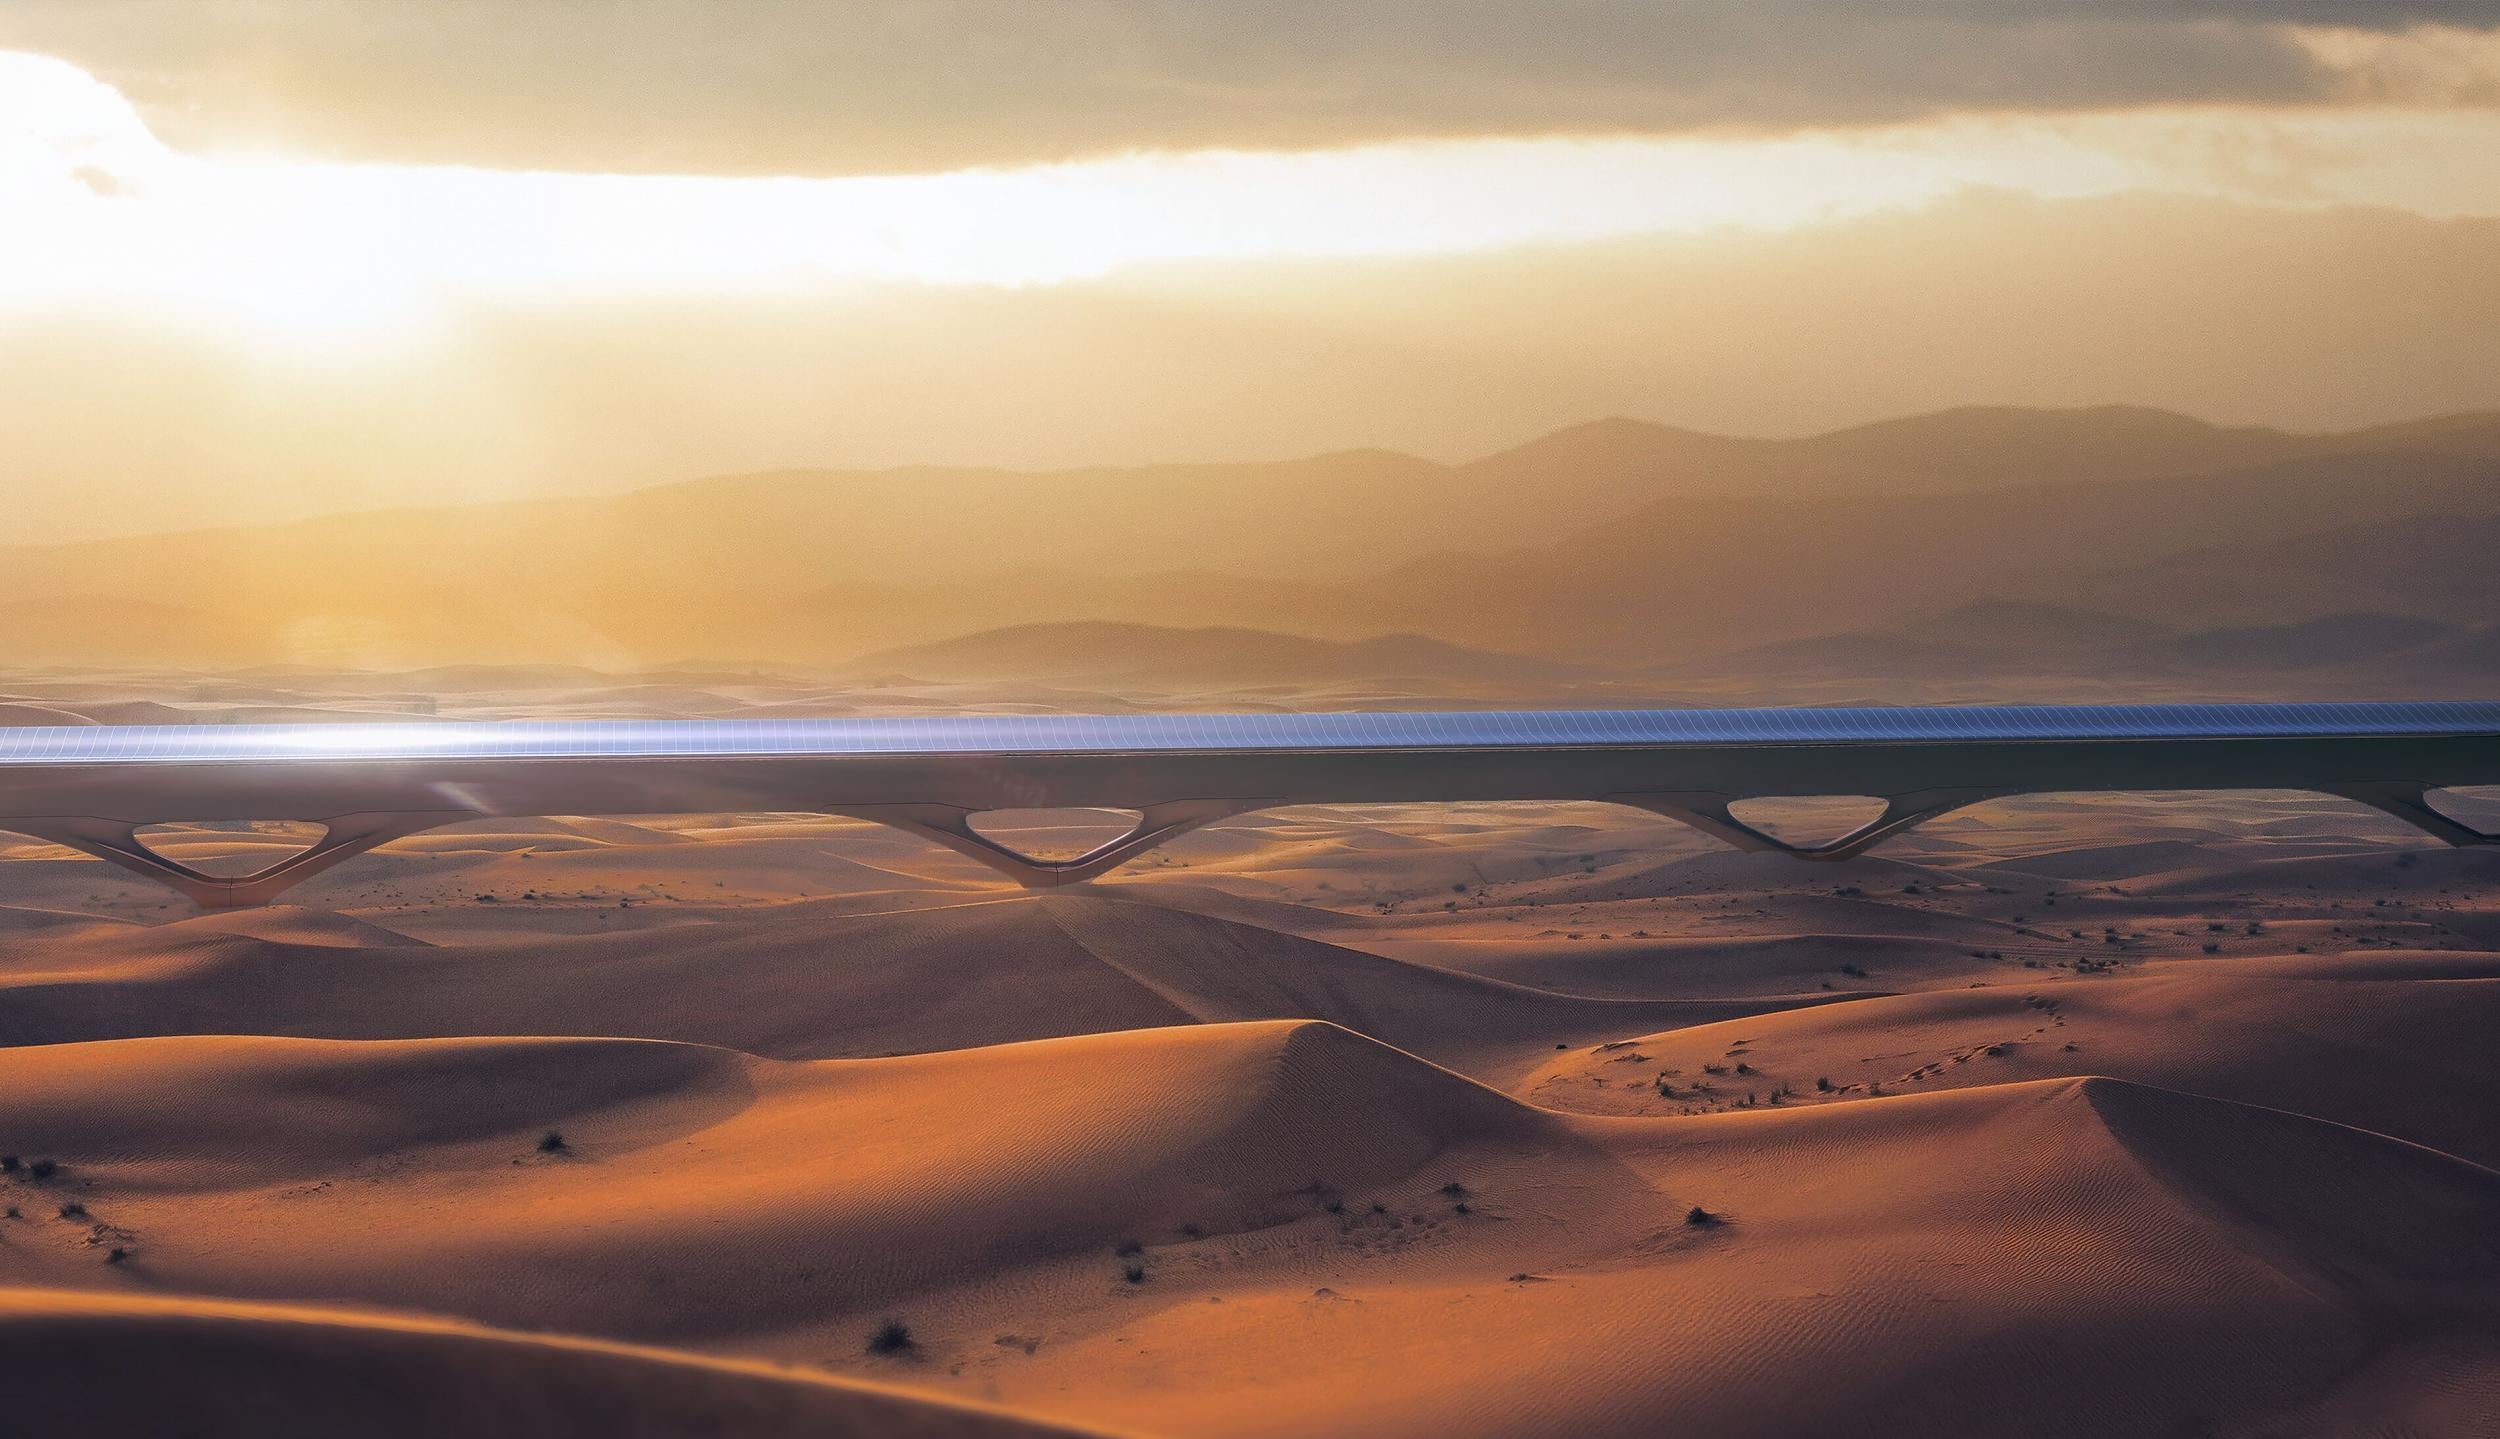 As two companies compete to complete&nbsp;the world's first commercial hyperloop, one stretch of desert&nbsp;holds the key to realising Elon Musk's vision for a new mode of transport